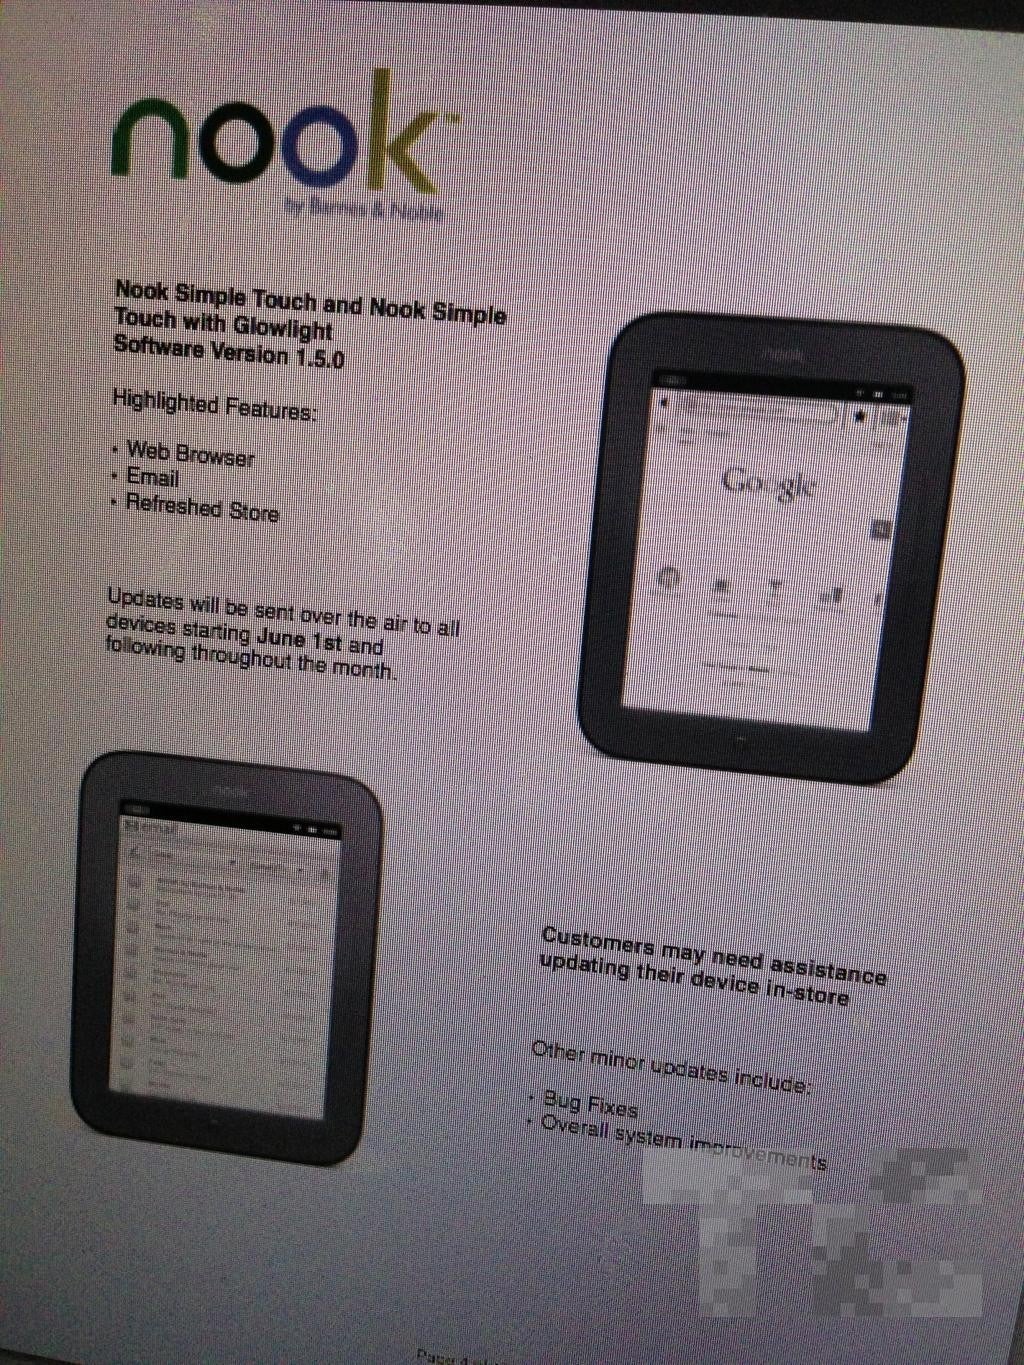 This leaked memo says that an OTA update will add an email client and a web browser to the Barnes and Noble Simple Touch - June 1st update to add email and browser to Nook Simple Touch eReaders?